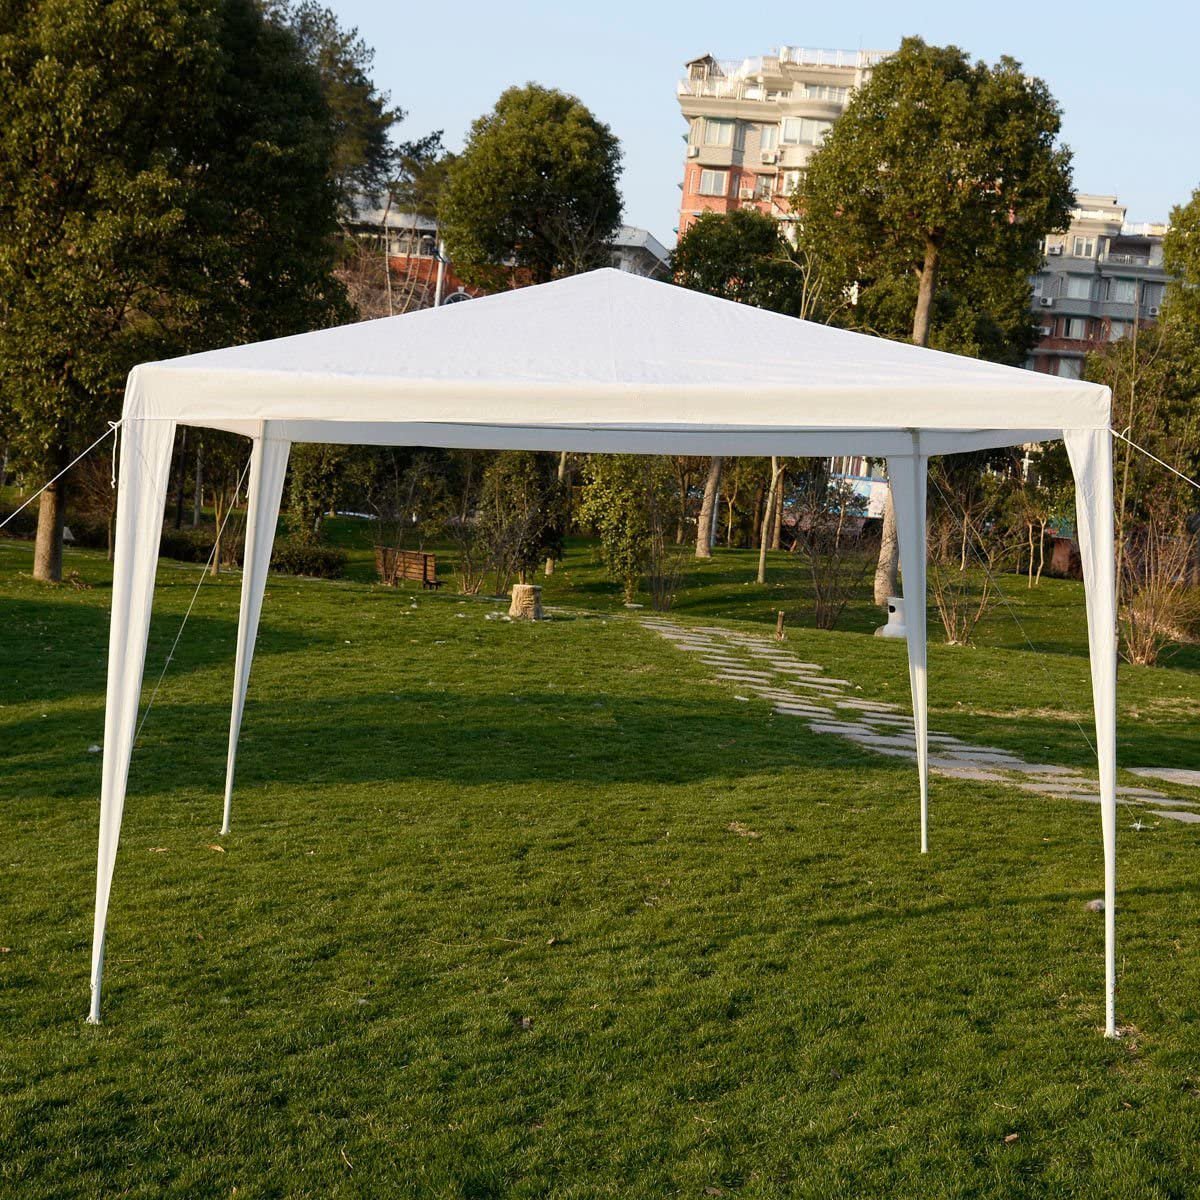 10'x10' Patio Tent Party Wedding Tent Gazebo Canopy Camping Shelter Outdoor